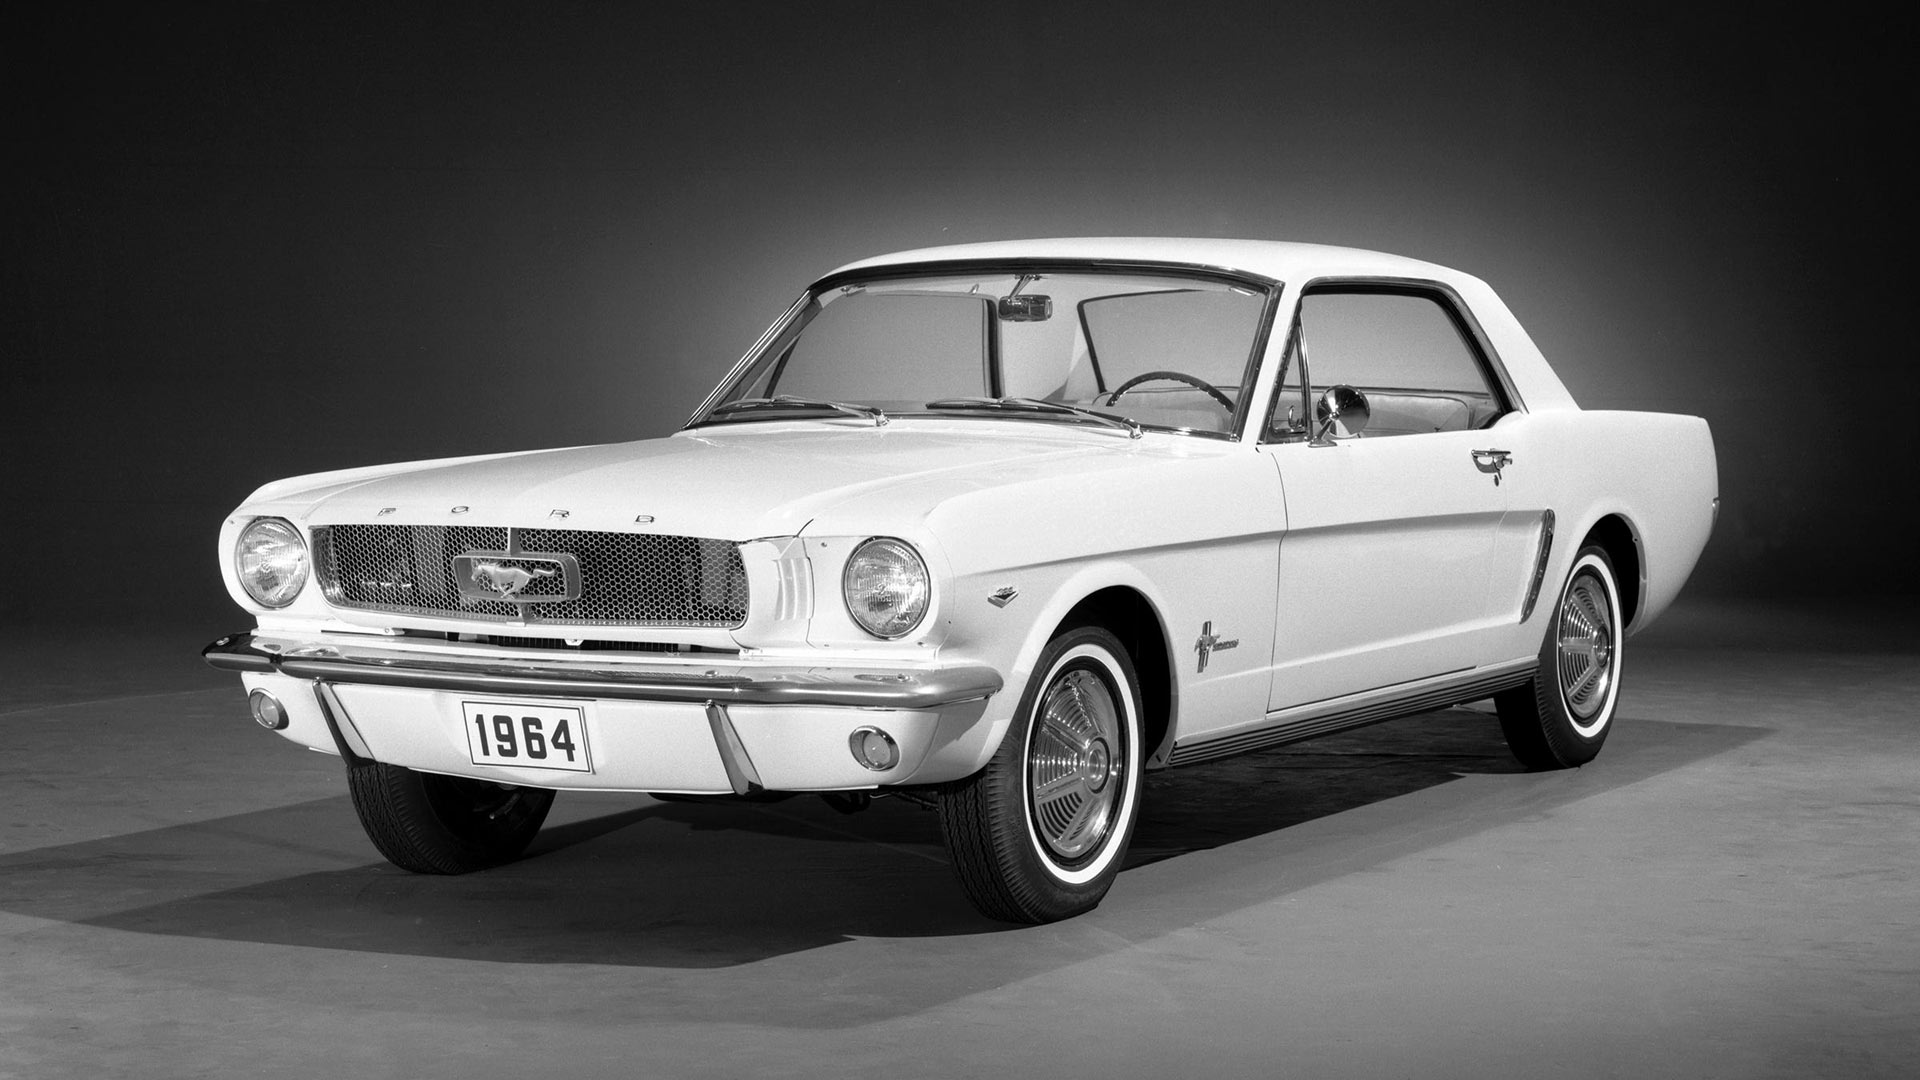 First Mustang produced in March 1964